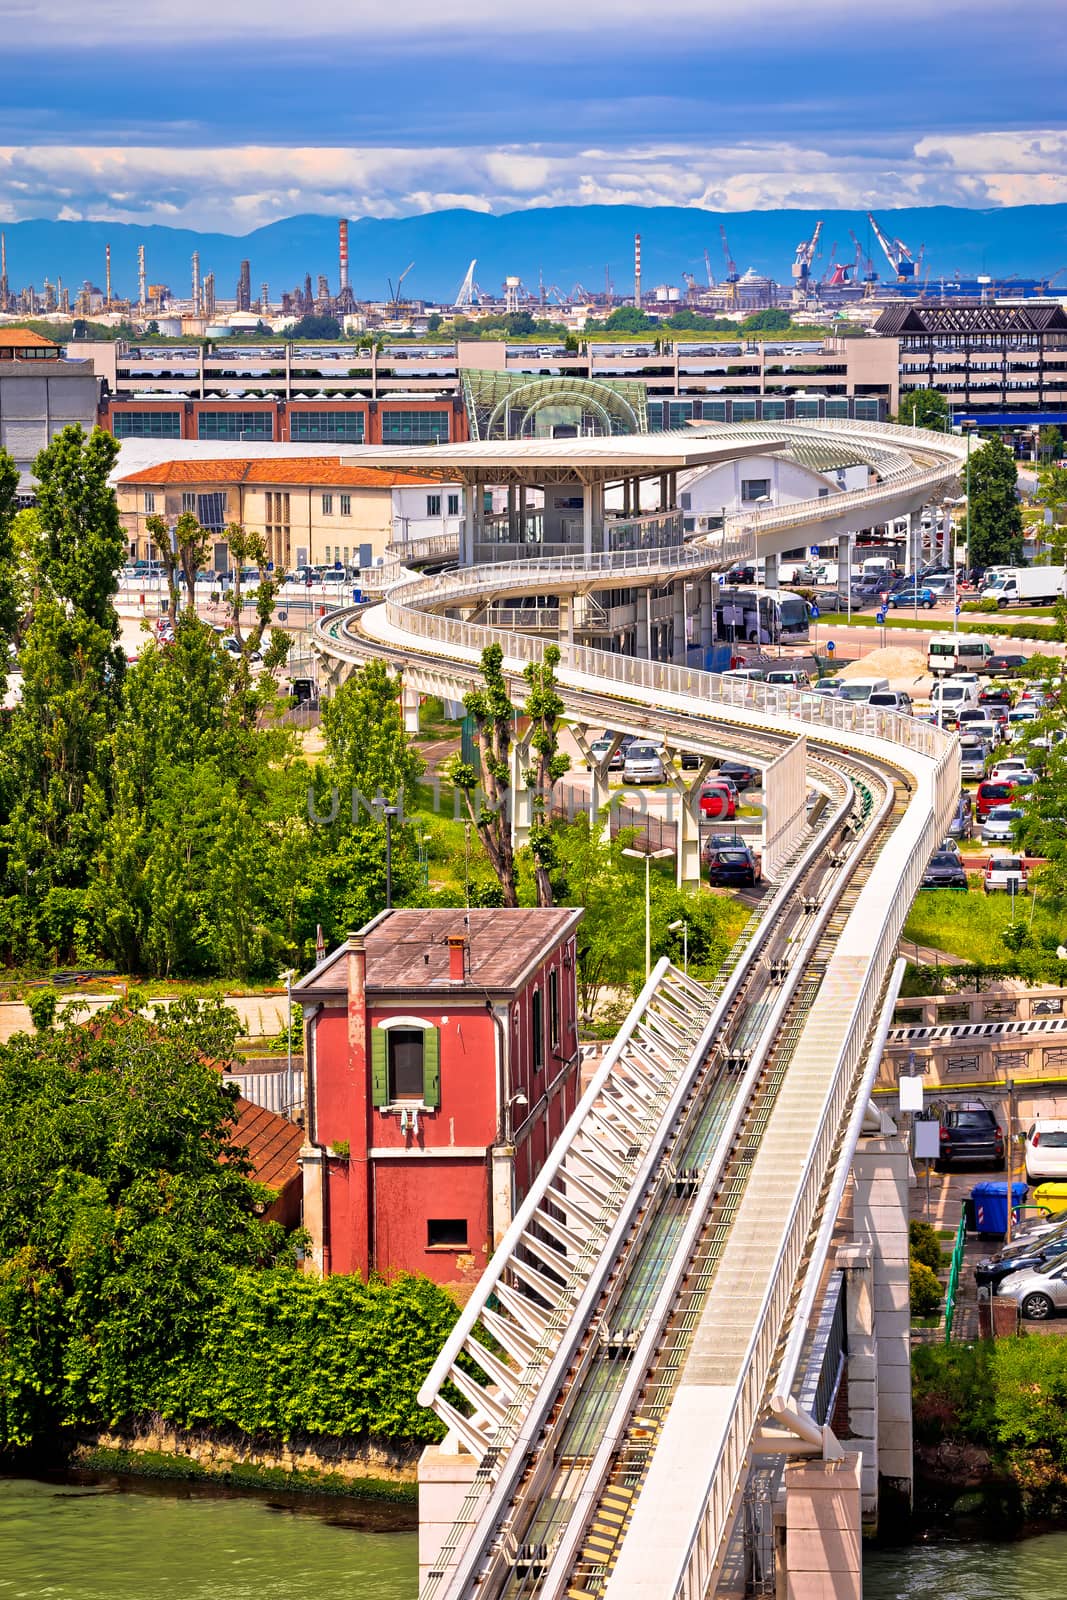 Venice People Mover air rail transit system view, Veneto region of Italy